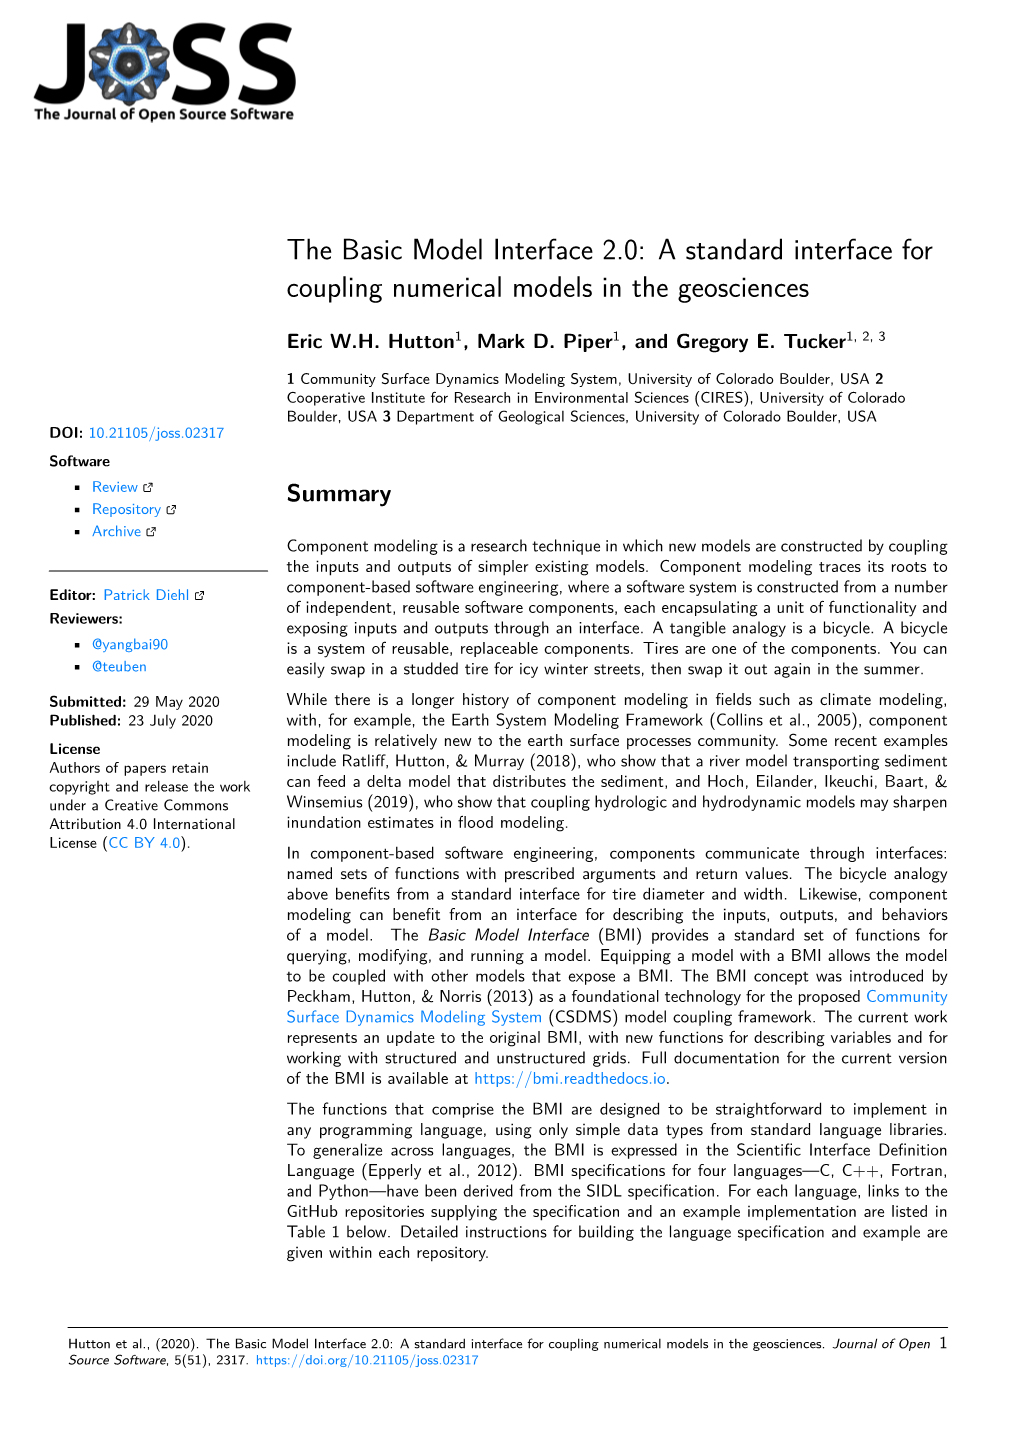 A Standard Interface for Coupling Numerical Models in the Geosciences